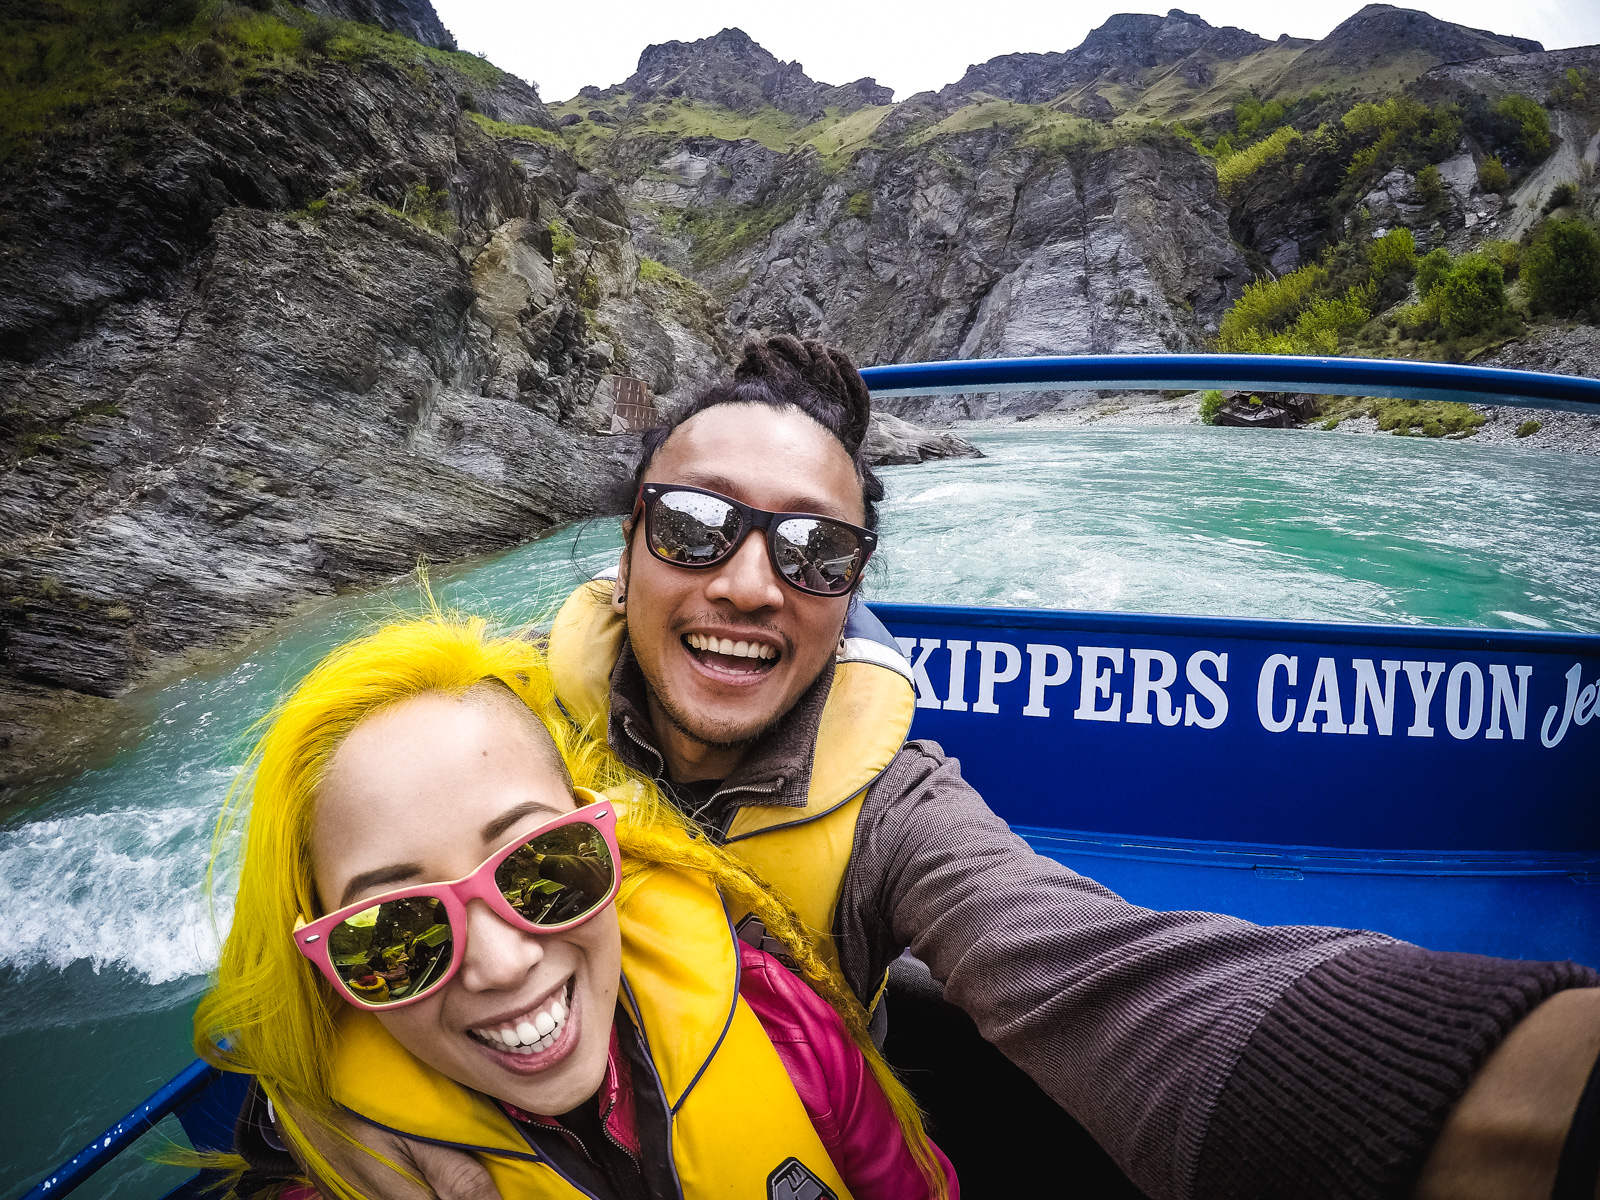 Skippers Canyon Jet in New Zealand